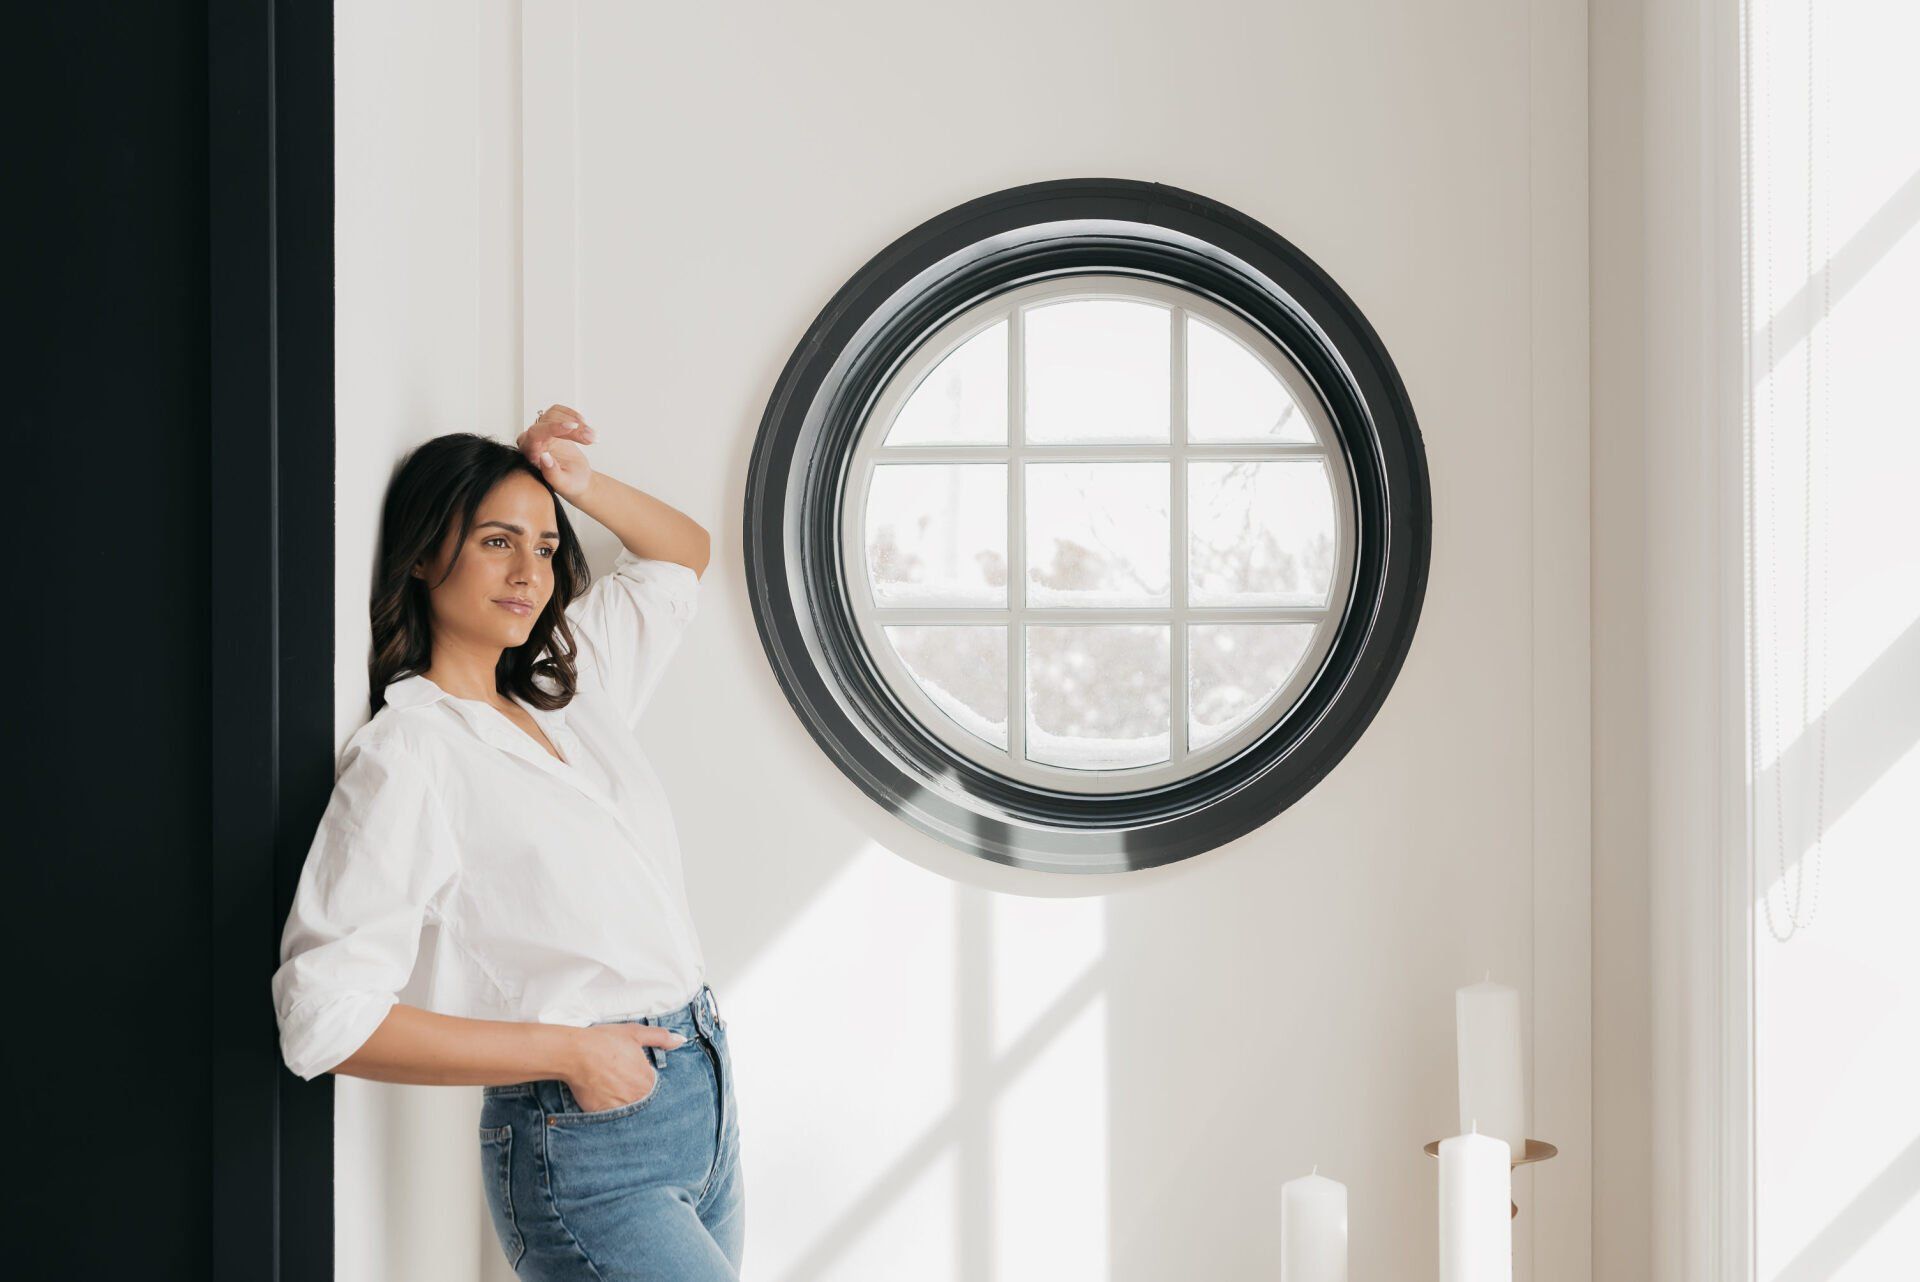 A young woman wearing a crisp white shirt and jeans posing beside a round window with natural lighting in the hallway of a manor